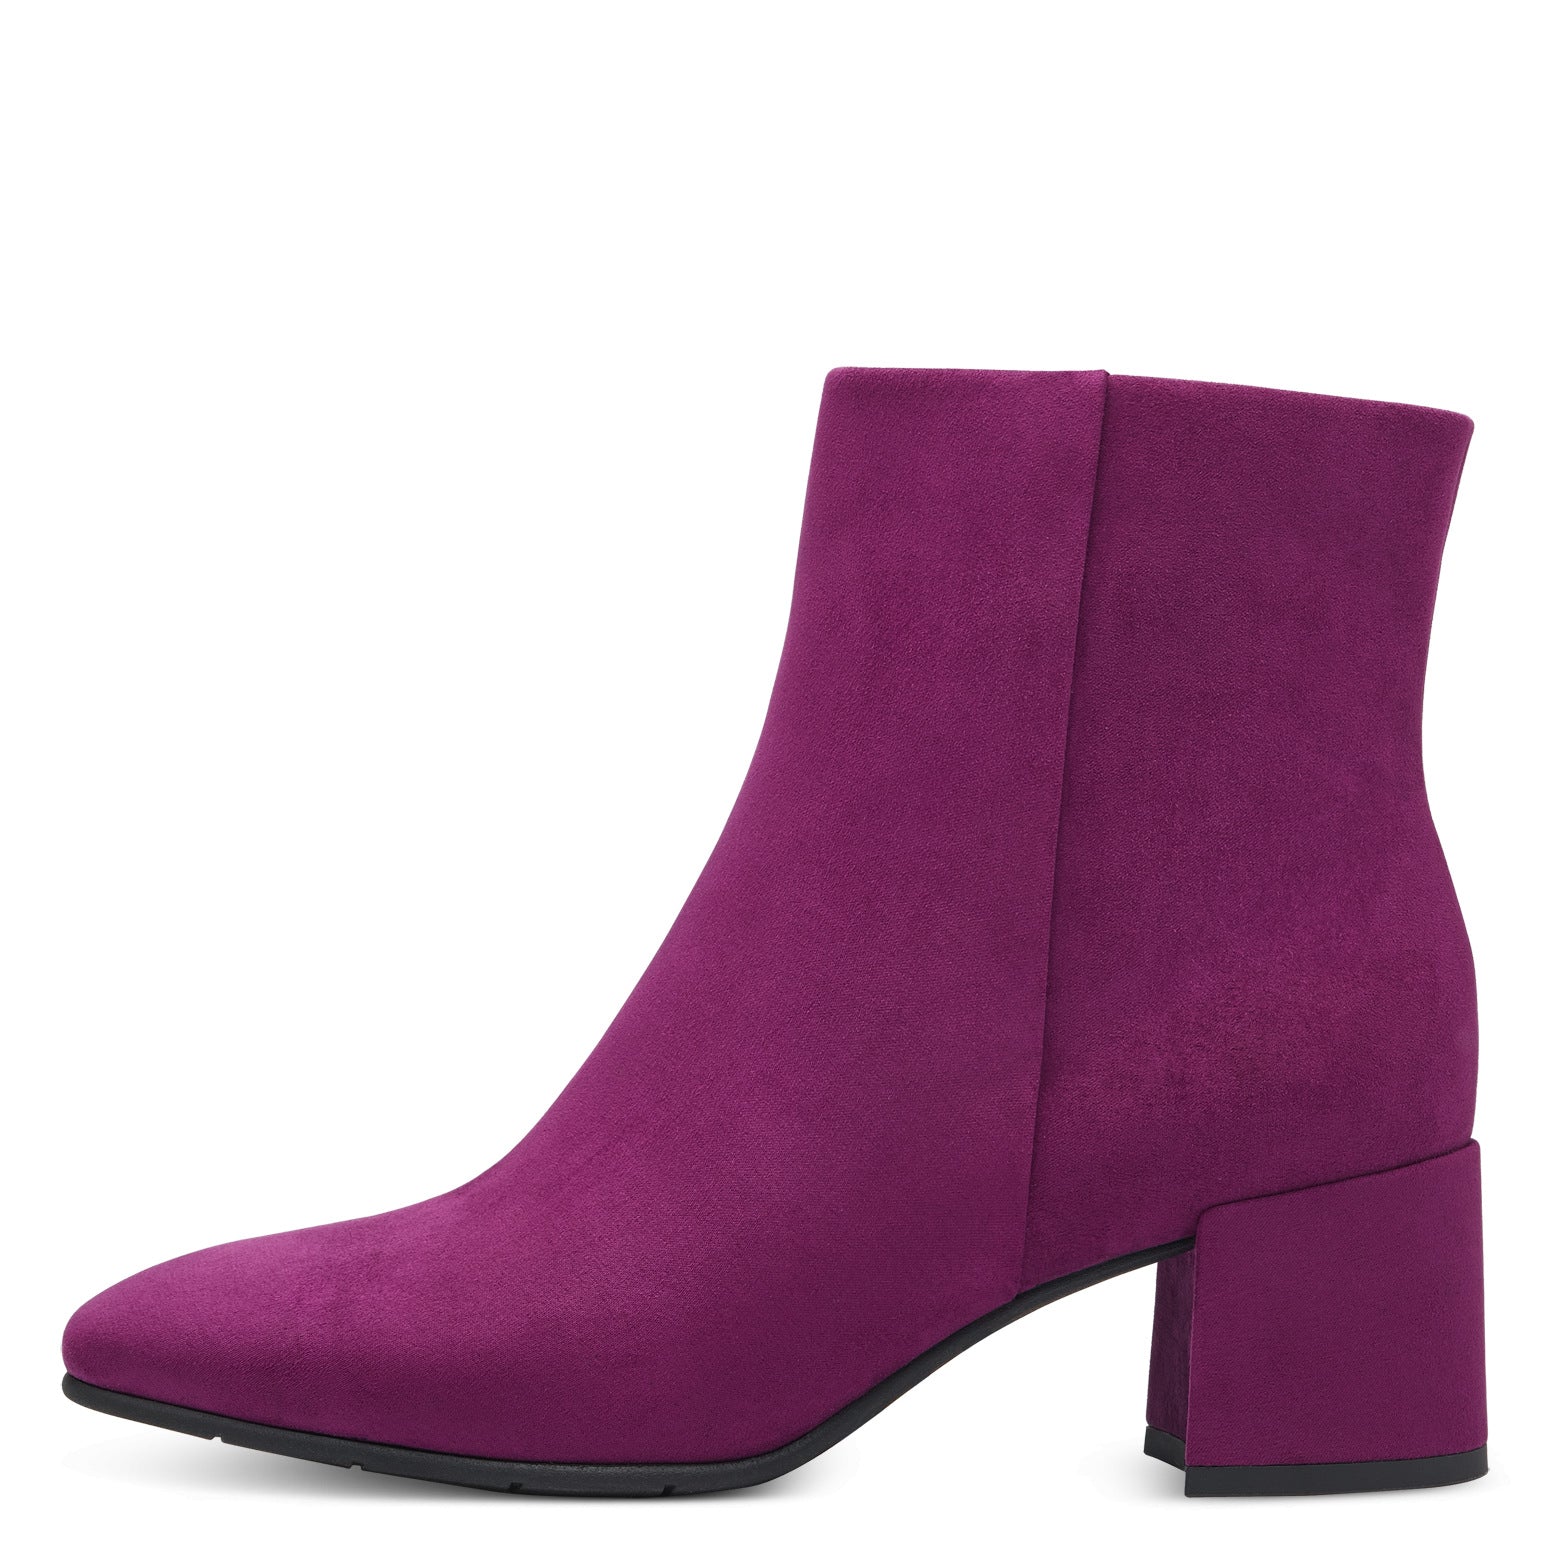 MT Ankle Boots- Grapes